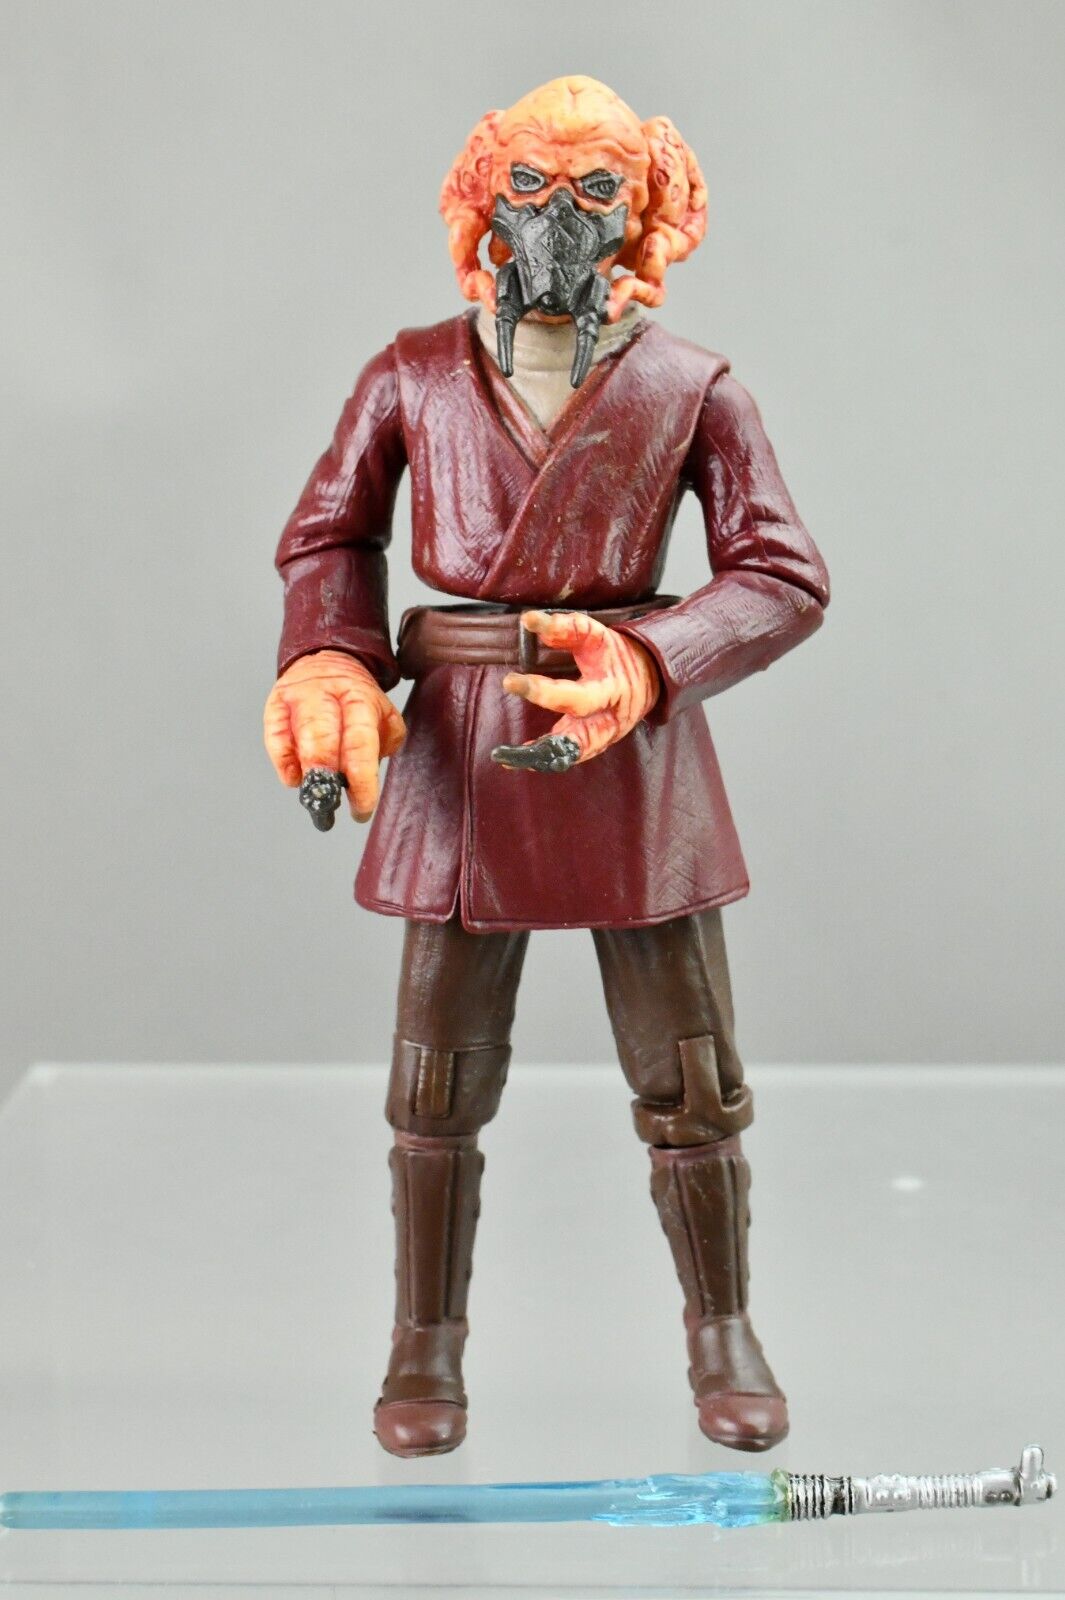 Star Wars Legacy Collection Plo Koon Revenge of the Sith 2004 3.75"